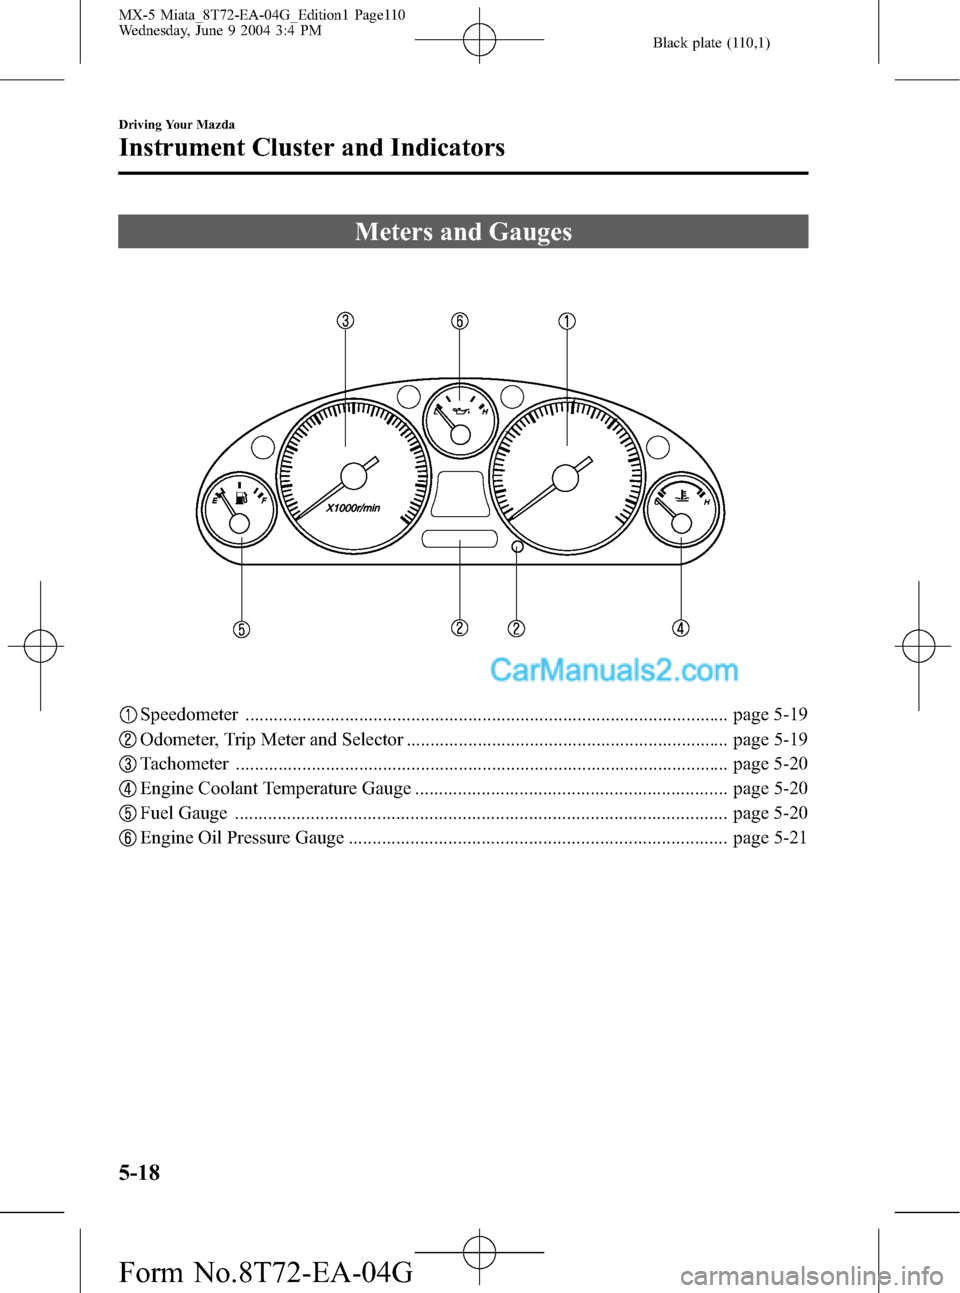 MAZDA MODEL MX-5 2005  Owners Manual (in English) Black plate (110,1)
Meters and Gauges
Speedometer ...................................................................................................... page 5-19
Odometer, Trip Meter and Selector ...